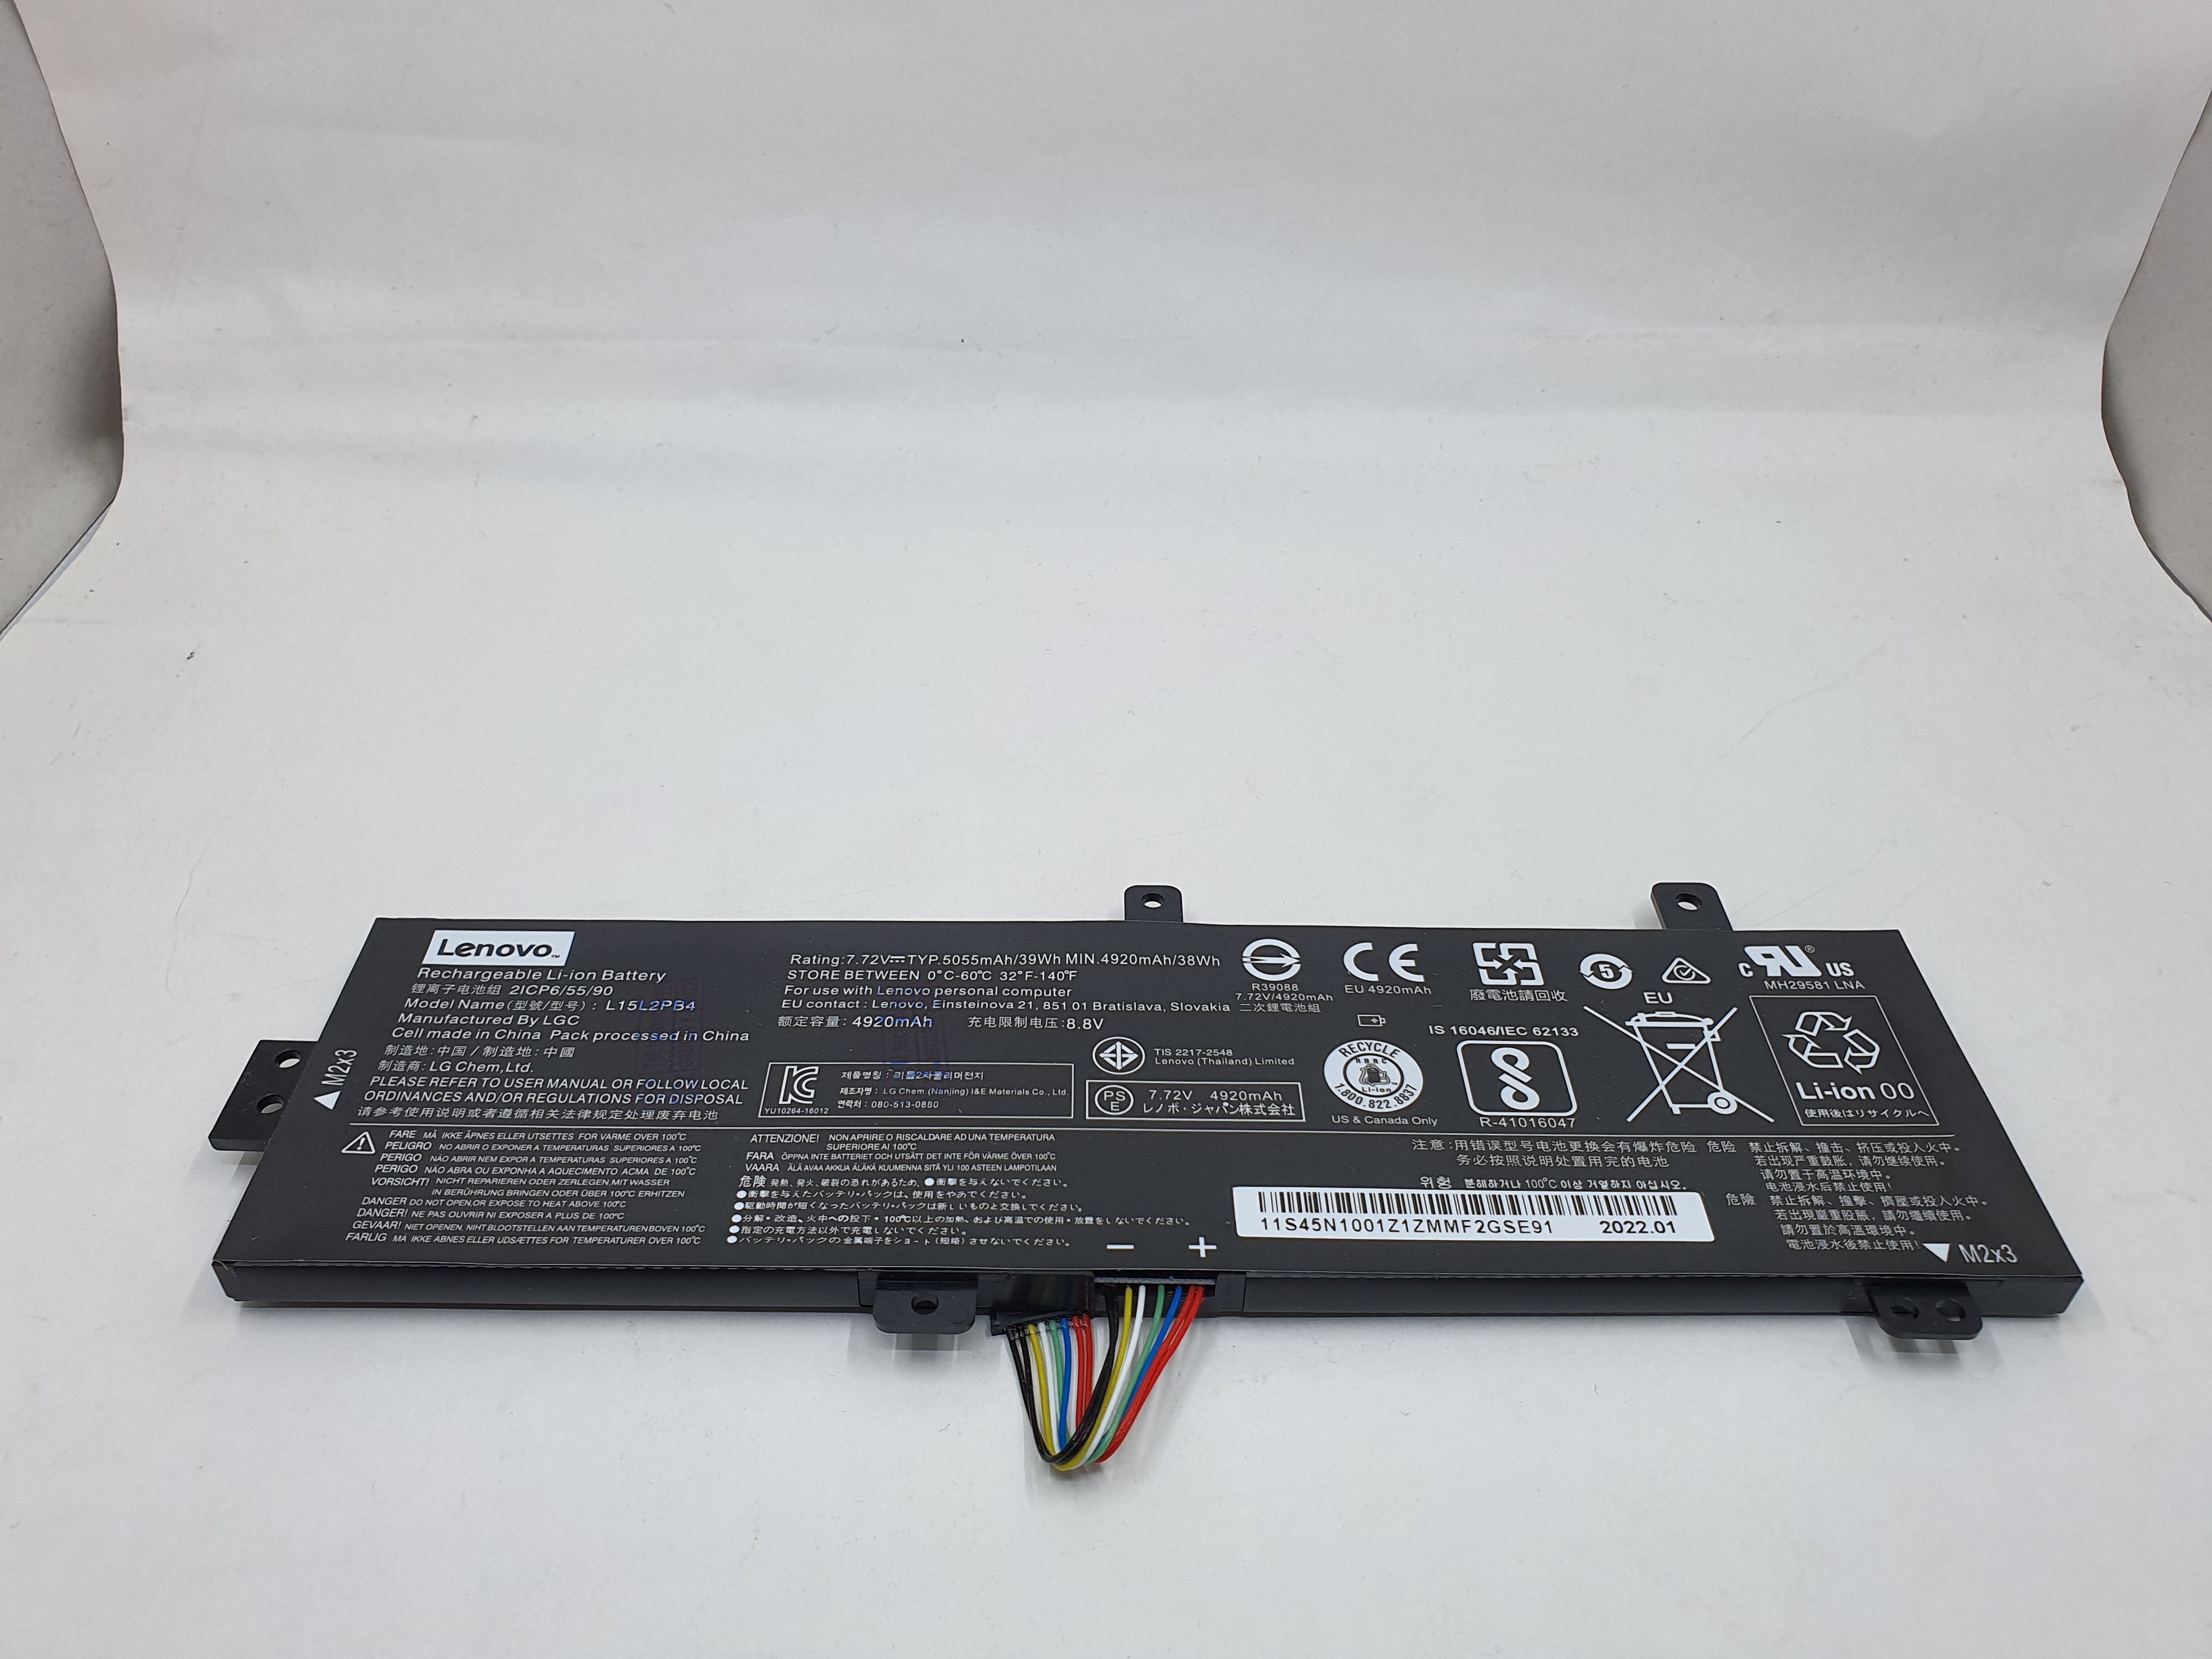 Lenovo Battery 310-15IKB A1 for Replacement - Lenovo IdeaPad 310-15IKB